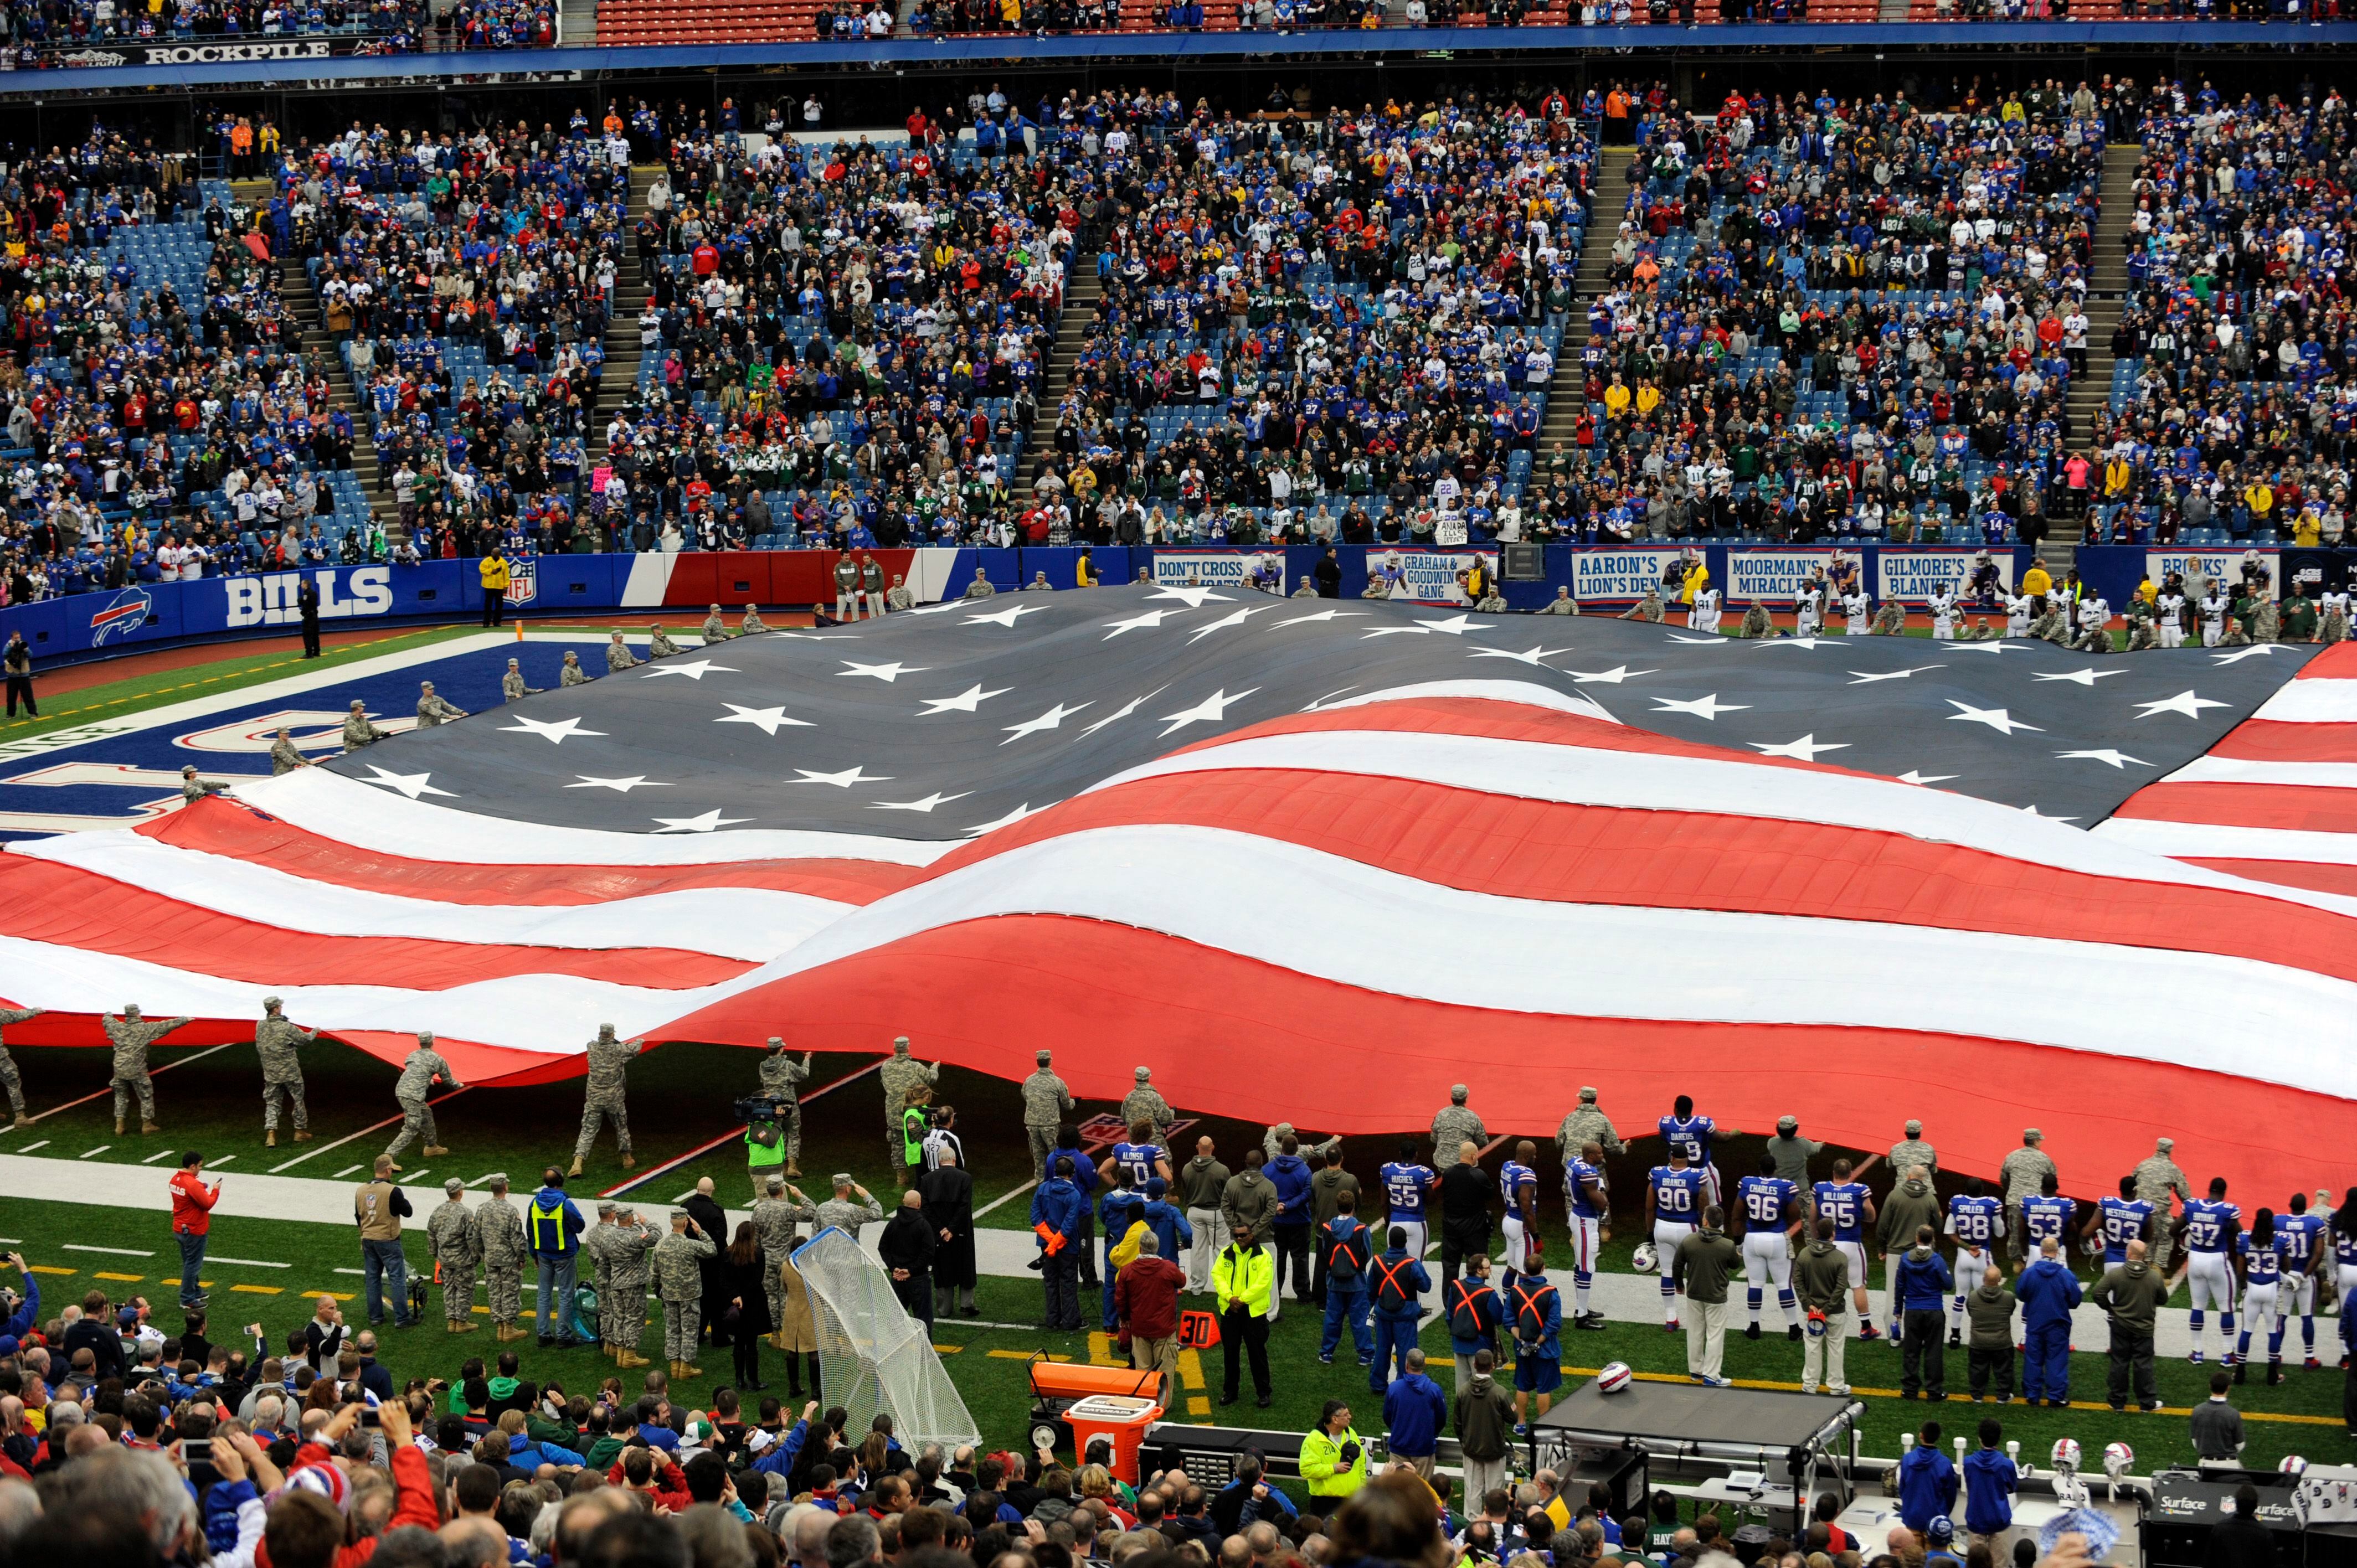 Overseas military service members can stream NFL games for free 